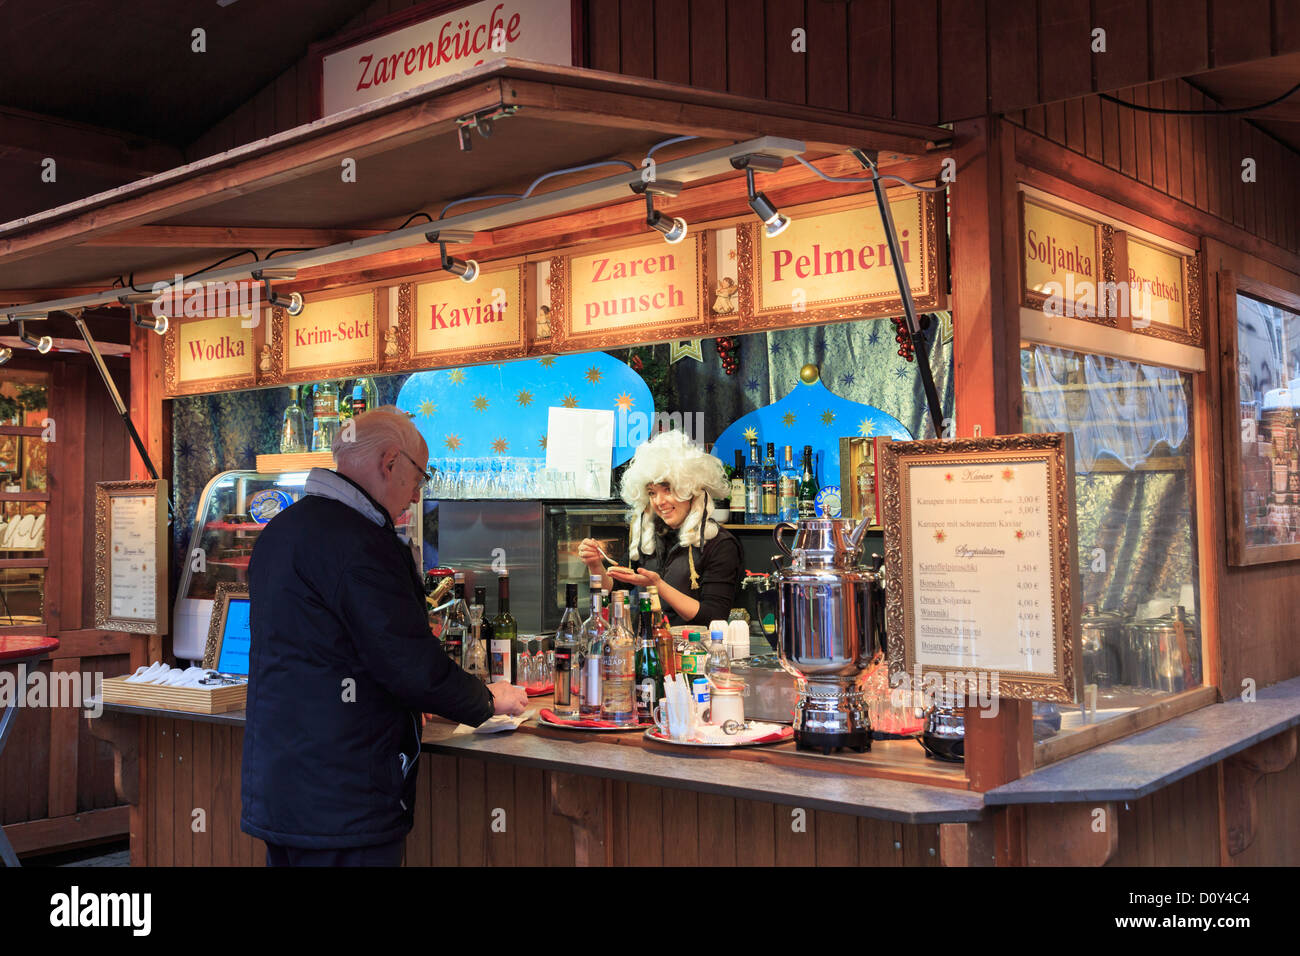 Man buying a snack from a smiling woman wearing a wig on a traditional Christmas market stall selling food and drinks Alexanderplatz, Berlin, Germany Stock Photo